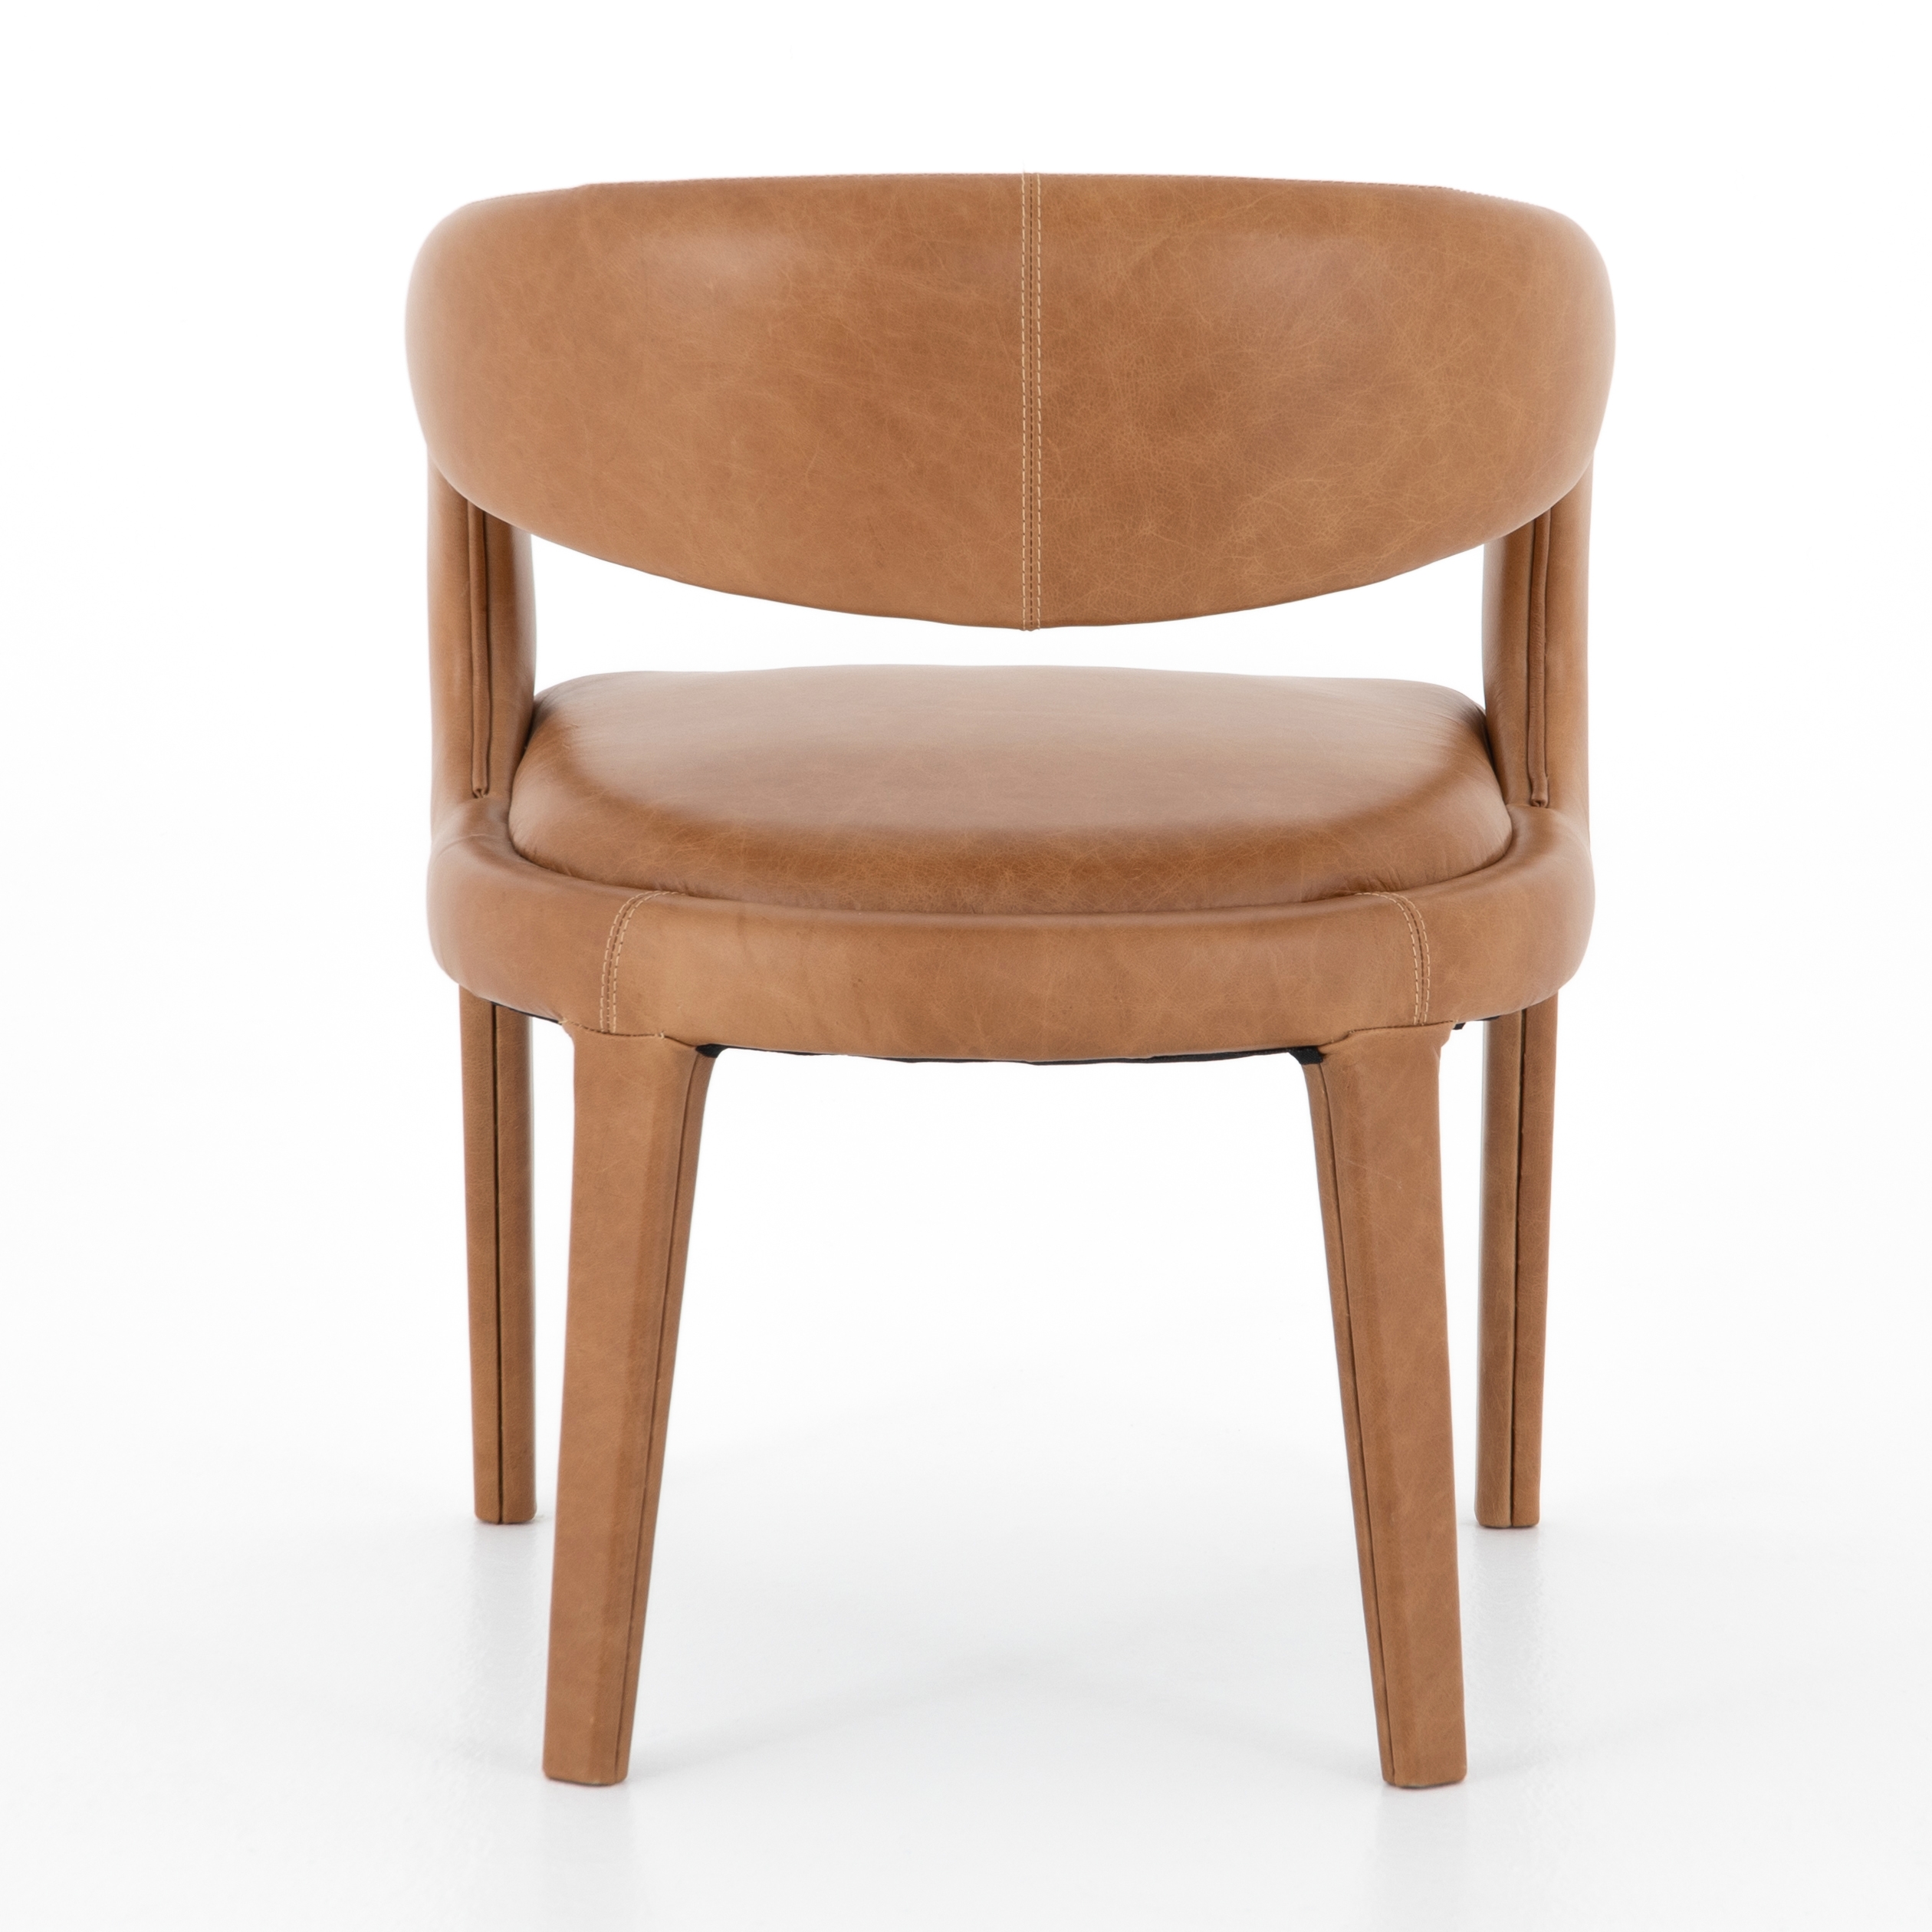 Hawkins Dining Chair-Butterscotch - Image 6